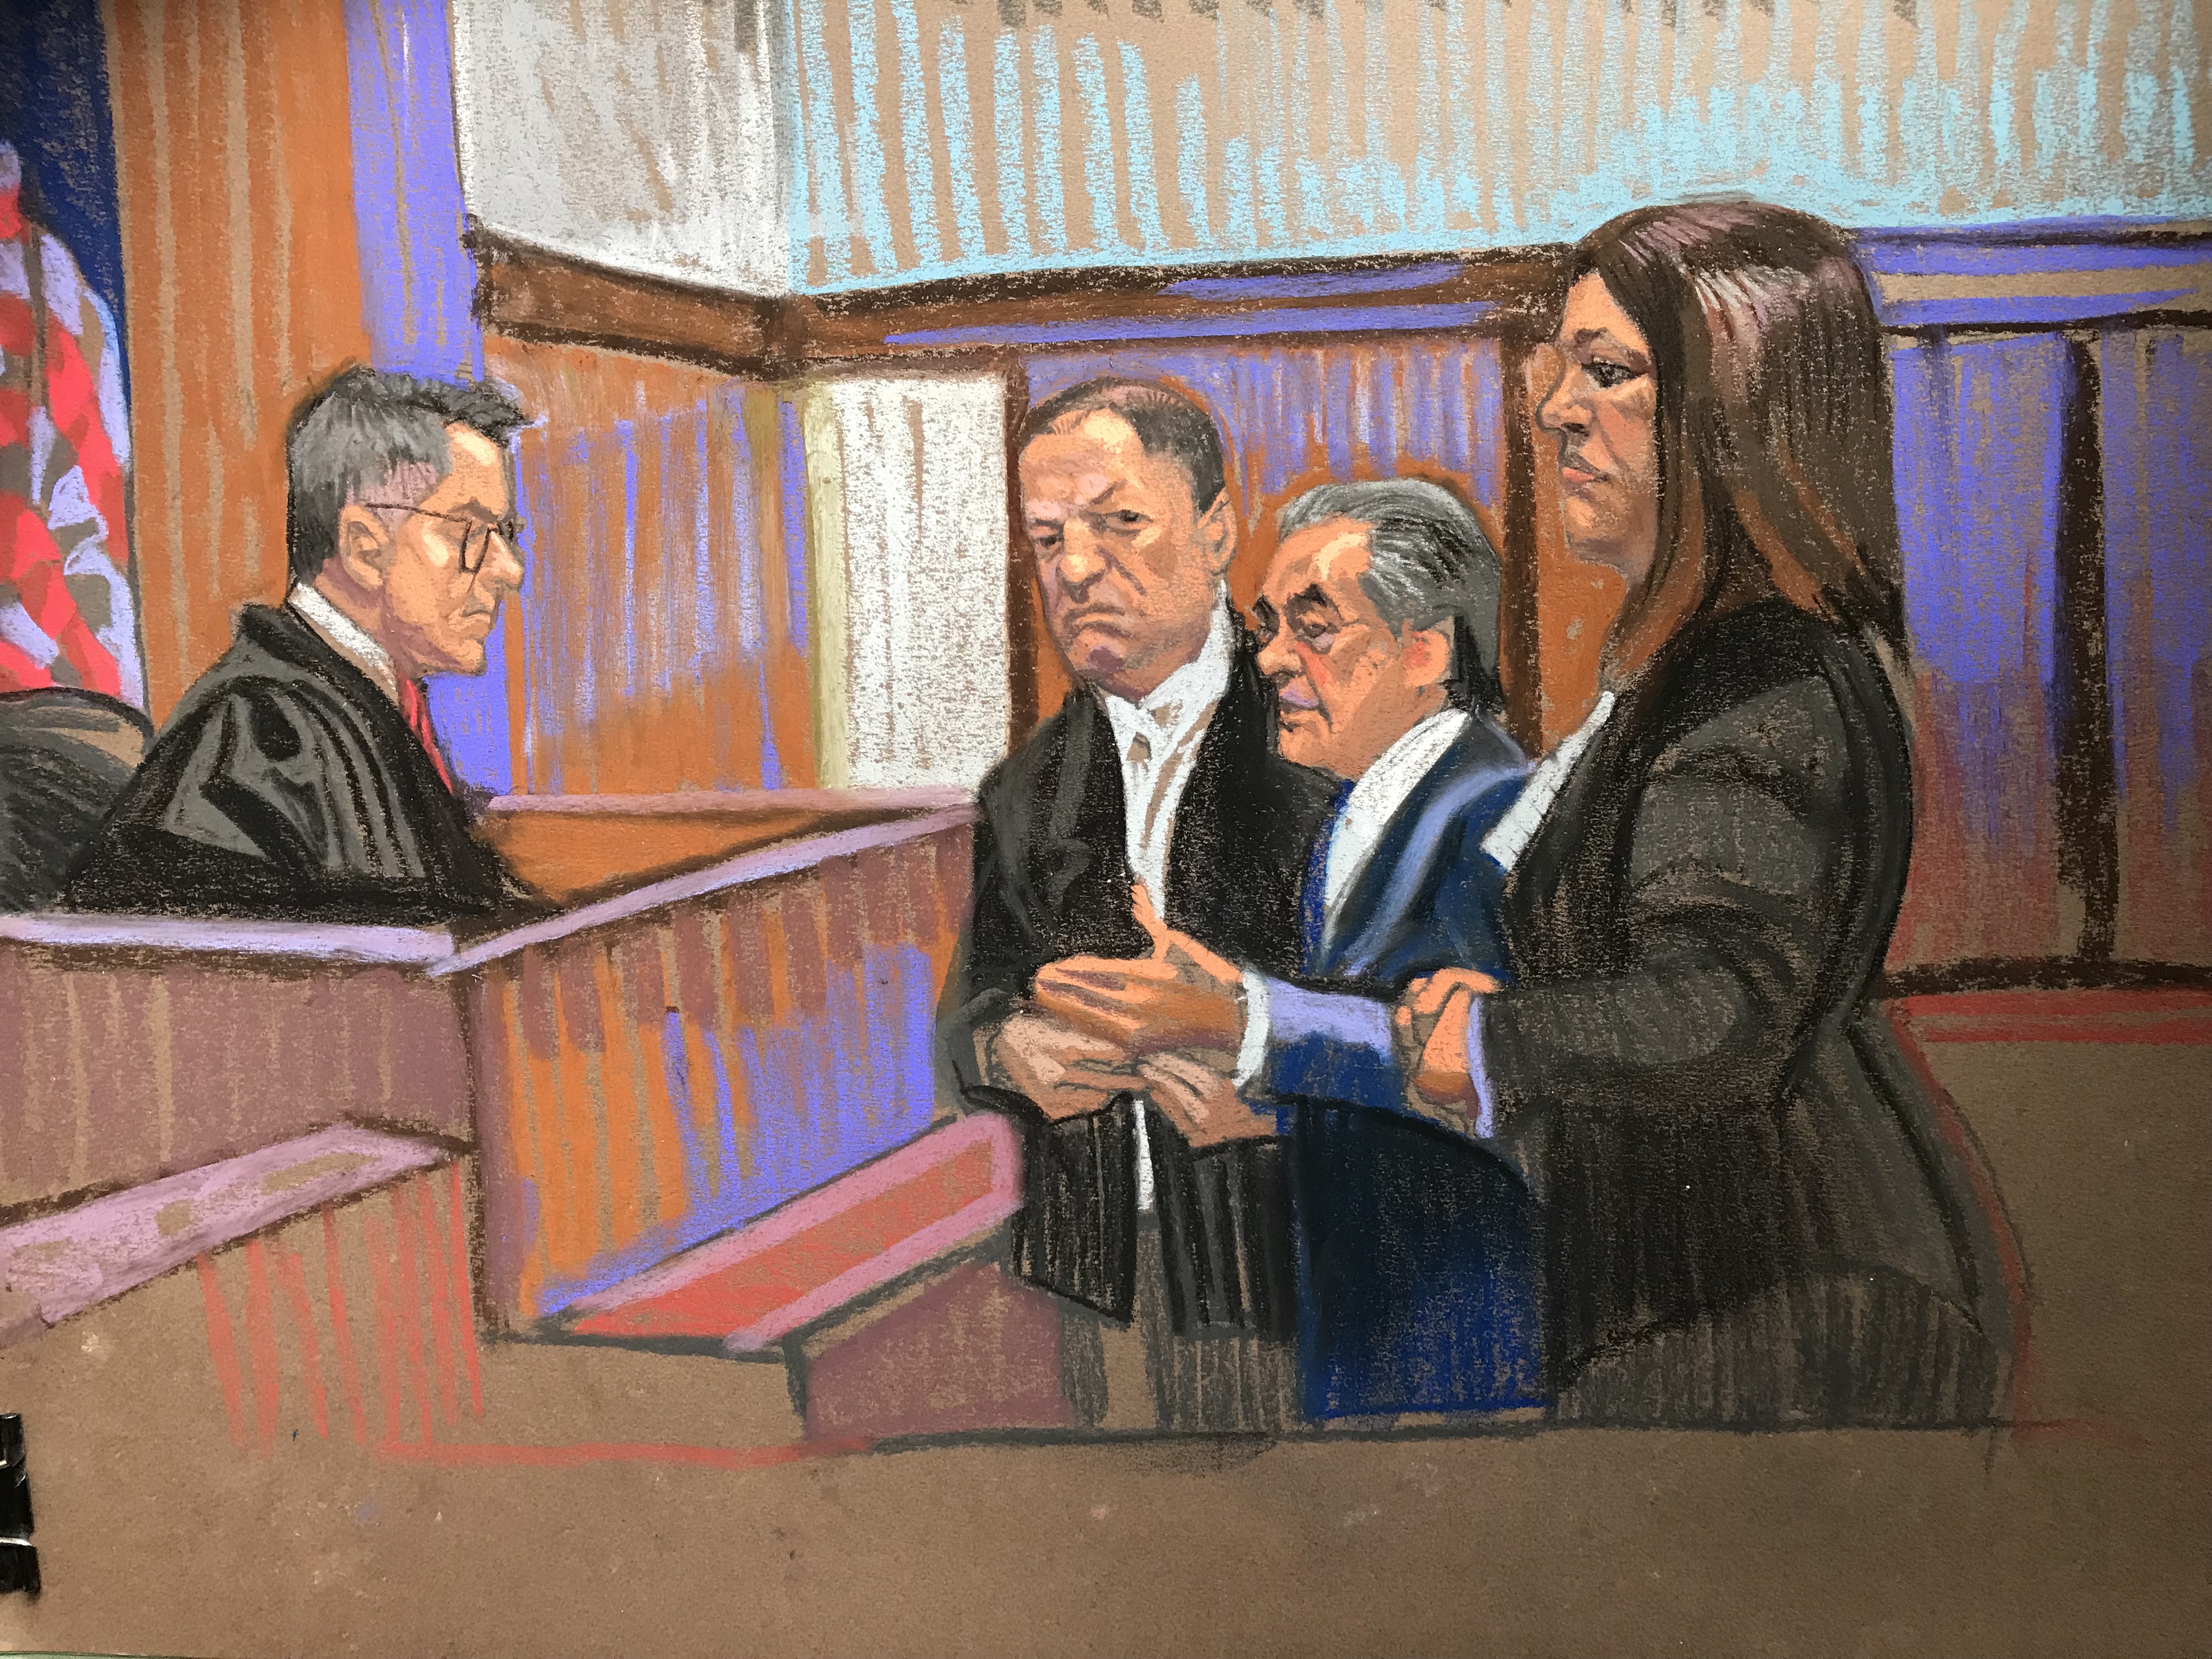 Courtroom sketch artist Christine Cornell captures disgraced film producer Harvey Weinstein in court on Tuesday, June 5. (Christine Cornell)